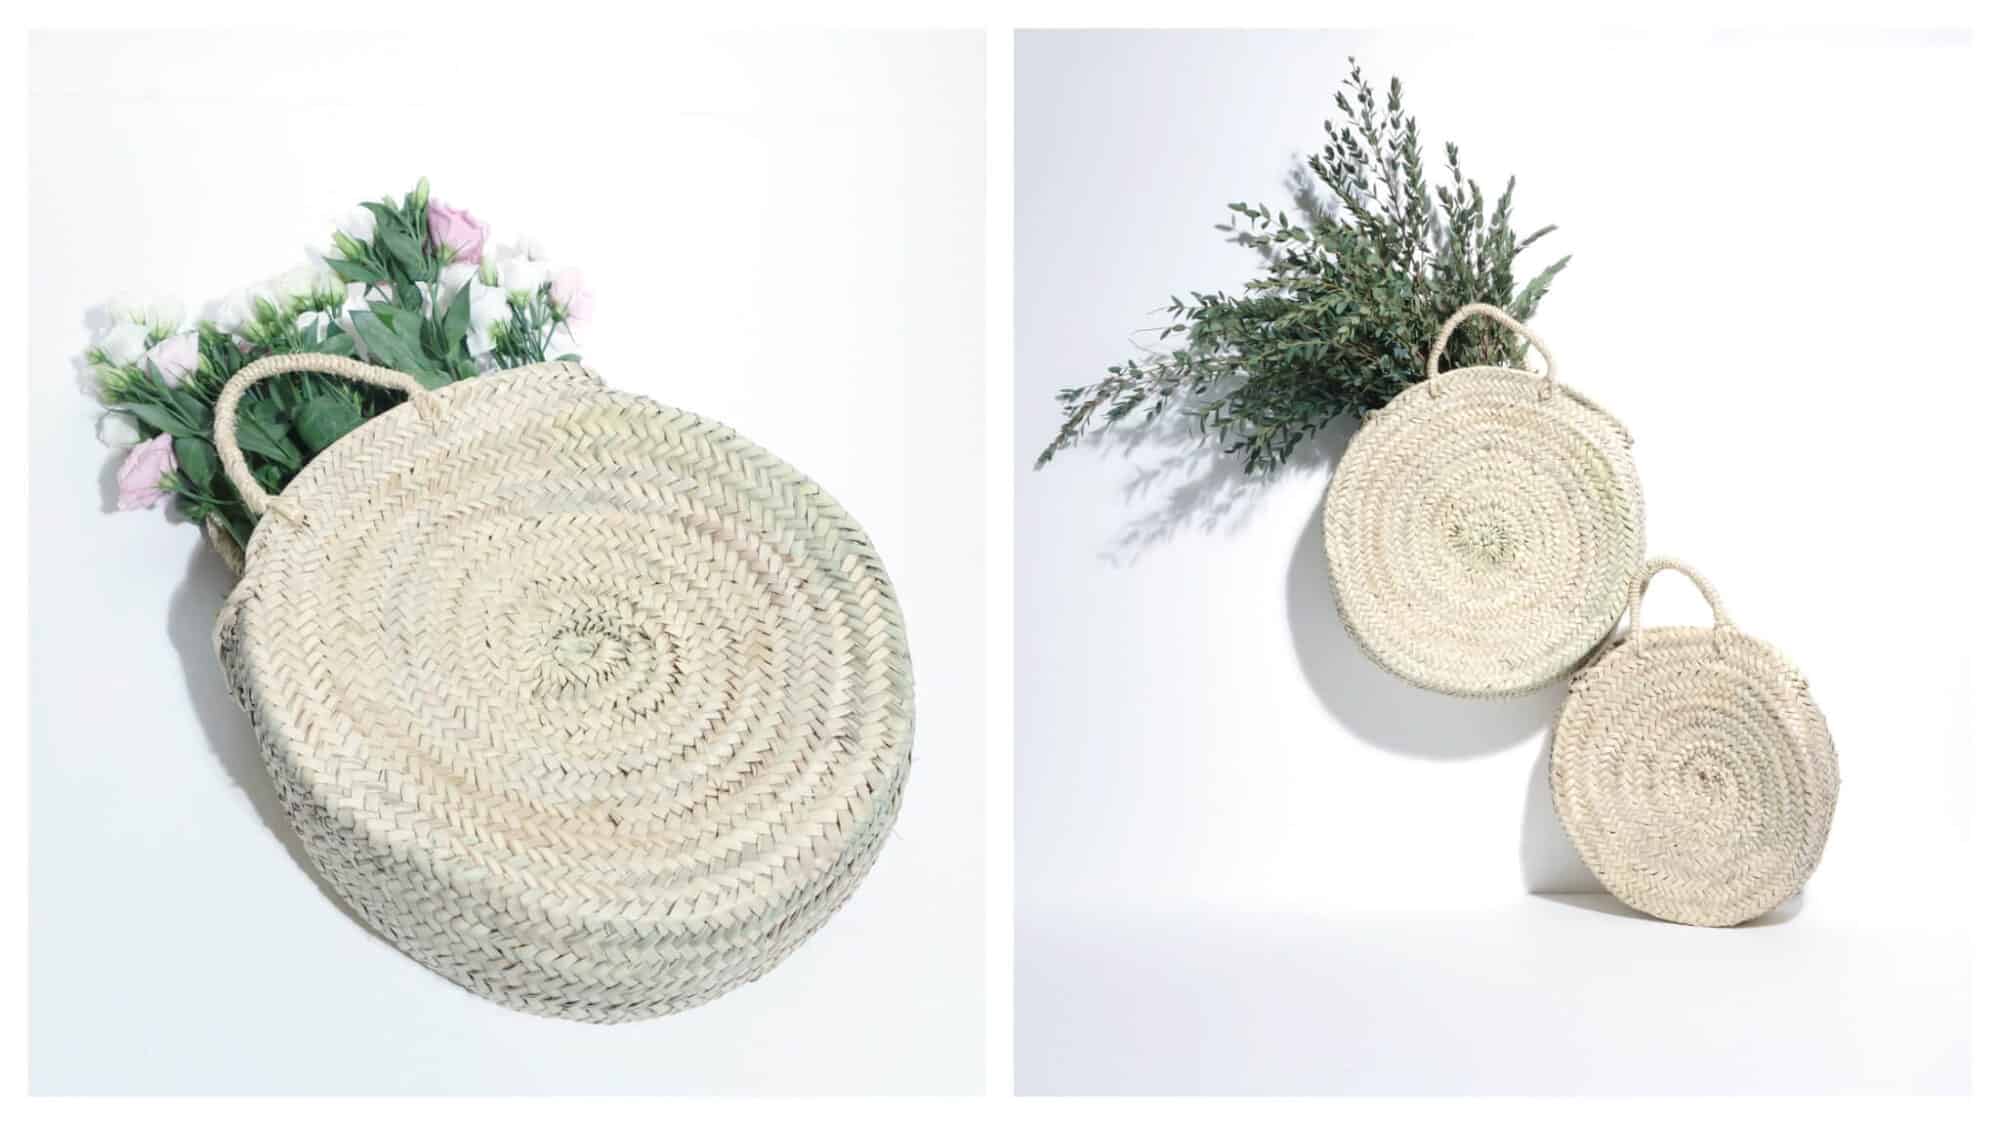 Left: A circular wicker handbag with small straps from the brand Sook Paris sits on a white surface. Pink and white flowers can be seen peaking out of the bag. Right: Two circular wicker handbags from Sook Paris are stacked atop each other, the one on top filled with flowers and greenery.